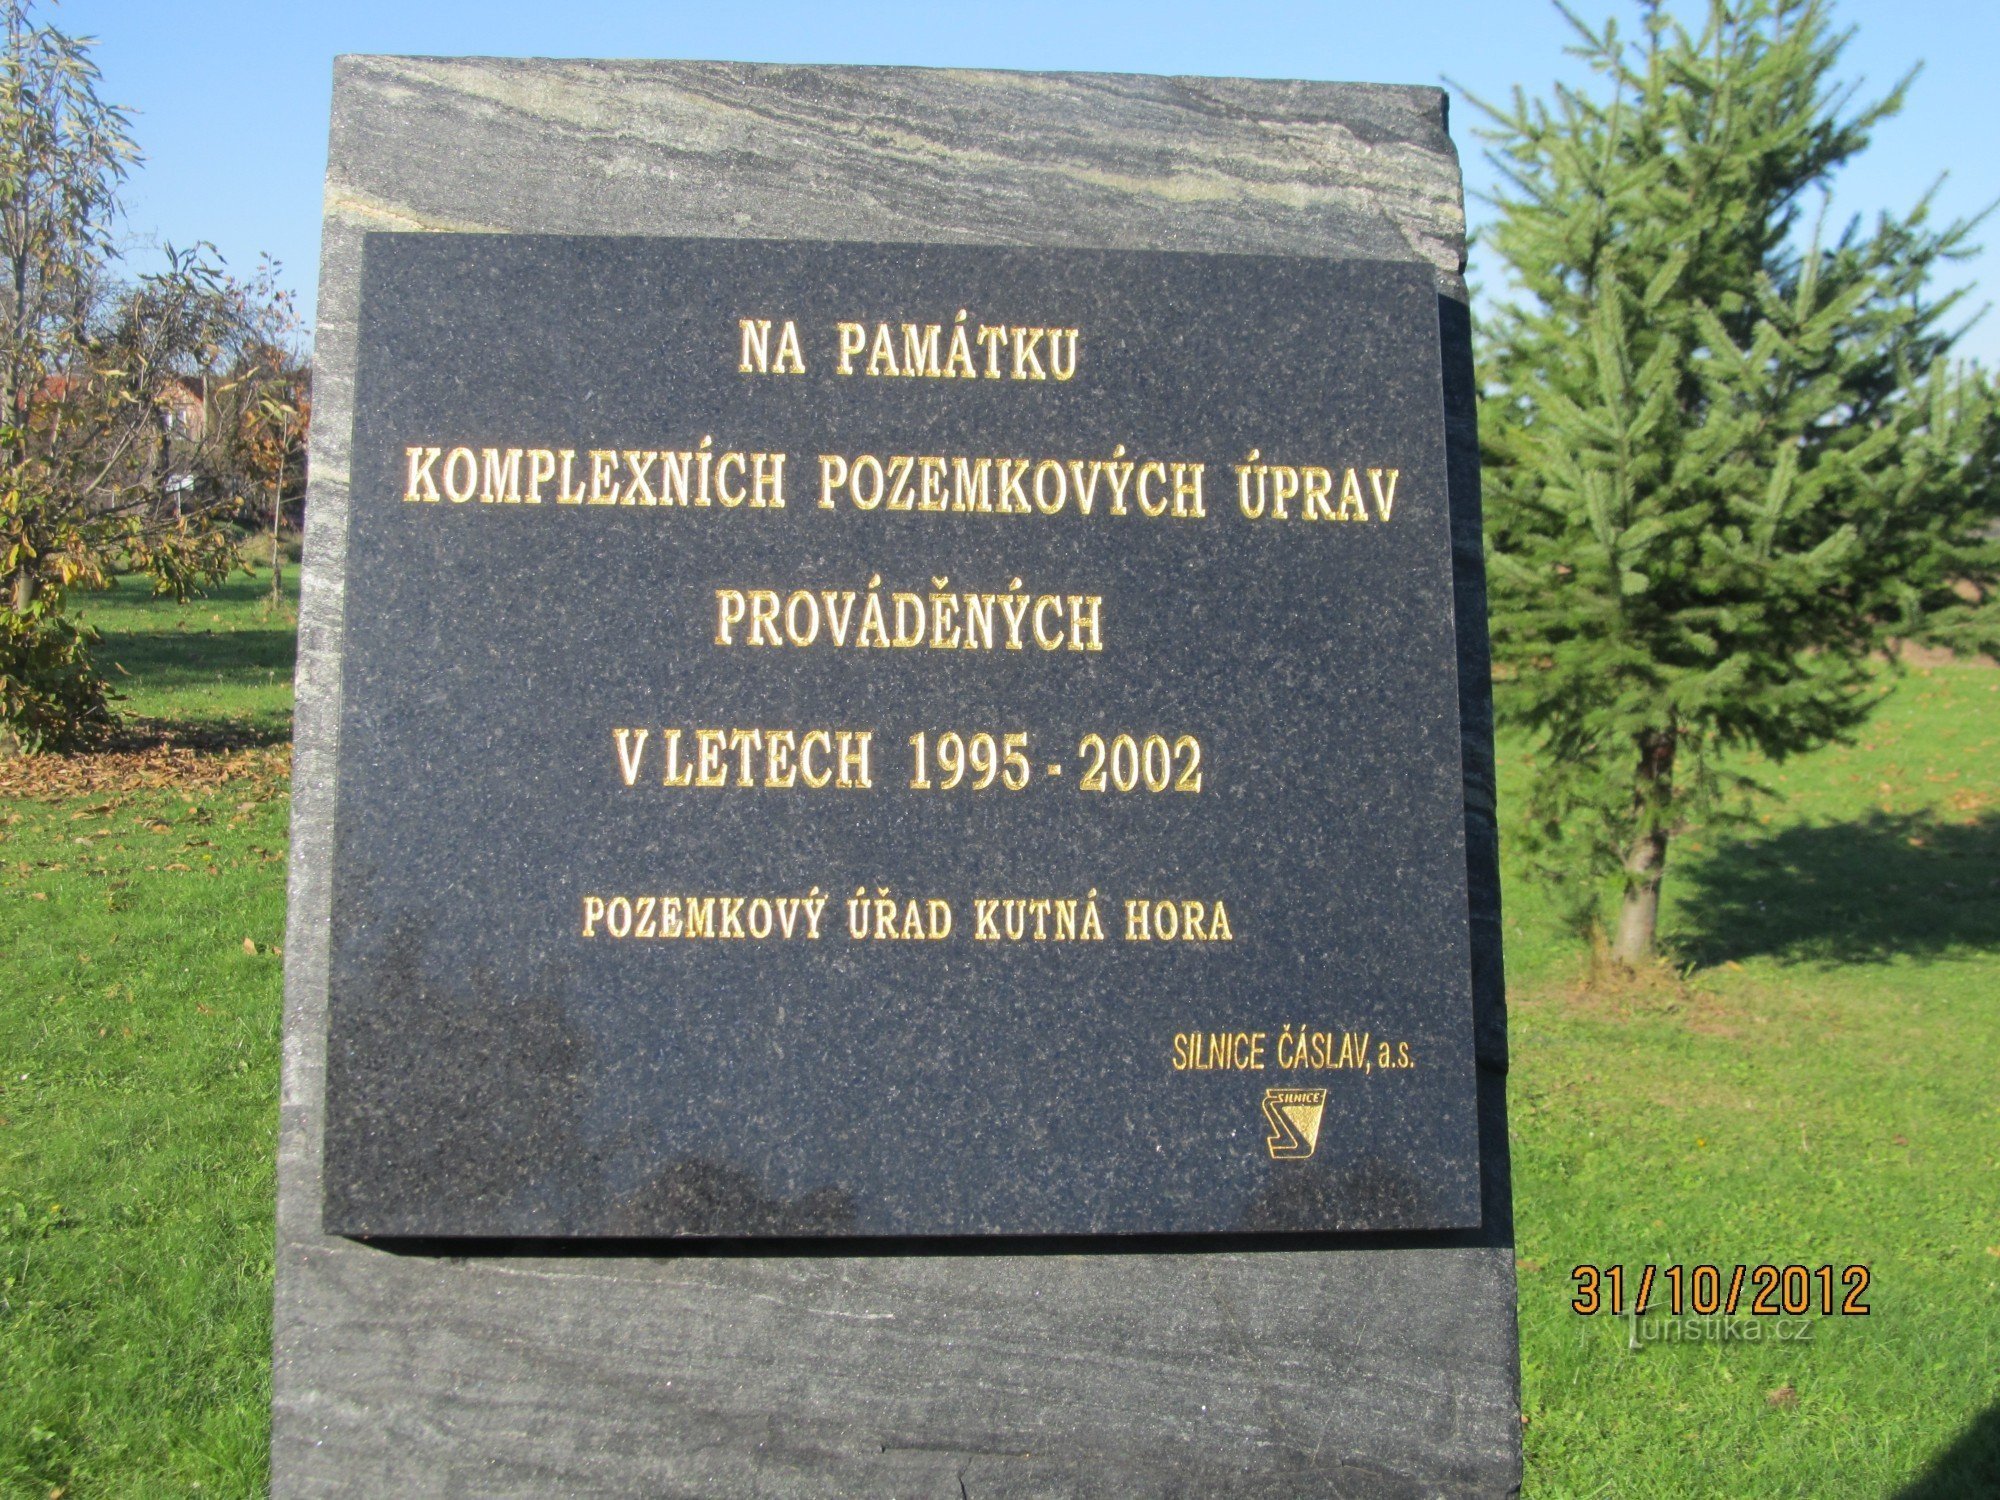 Monument in Hlízov in front of the cemetery - inscription on the monument